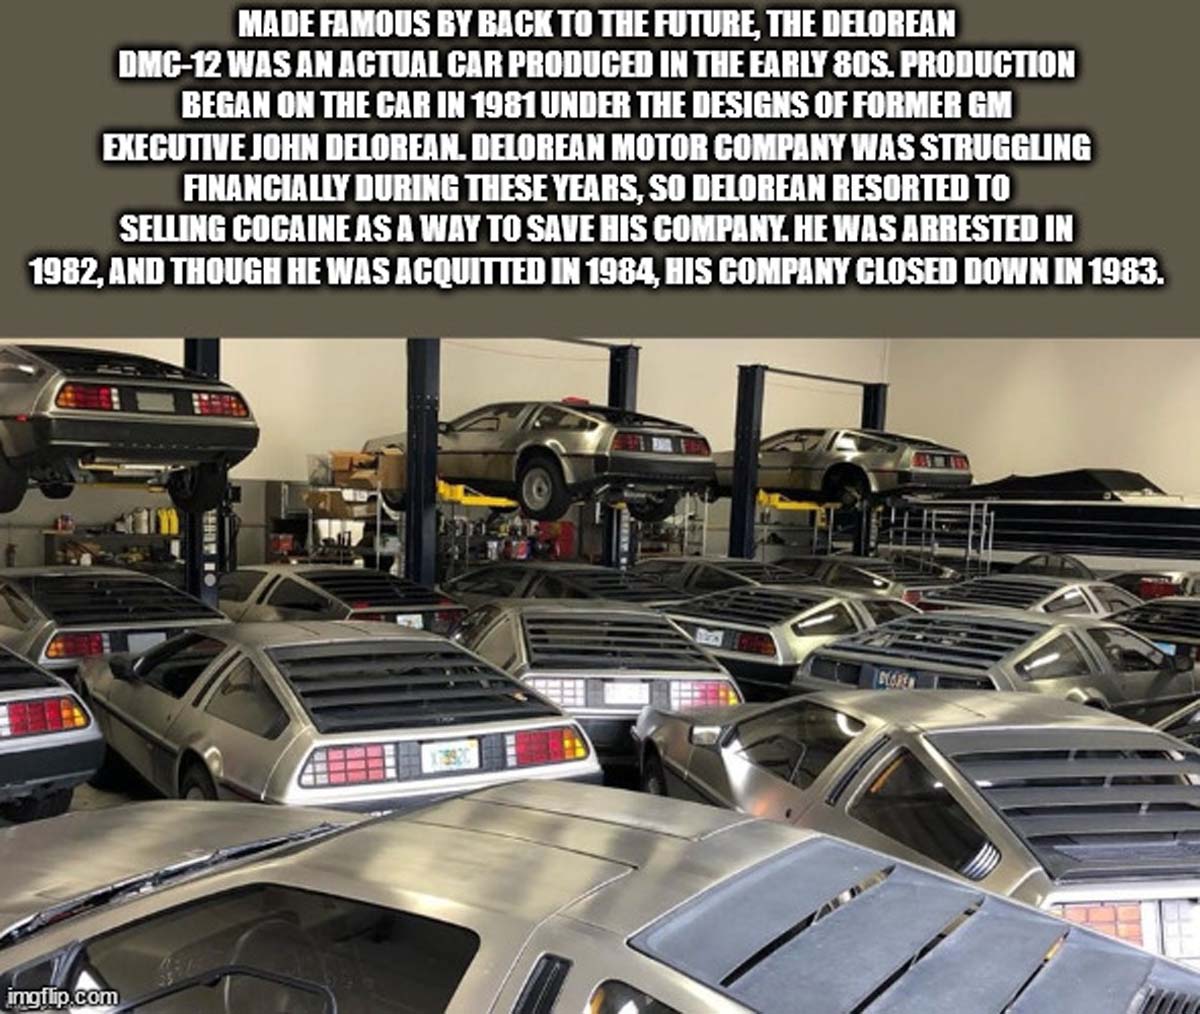 deloreans in garage meme - Made Famous By Back To The Future, The Delorean Dmc12 Was An Actual Car Produced In The Early 80S. Production Began On The Car In 1981 Under The Designs Of Former Gm Executive John Delorean. Delorean Motor Company Was Struggling